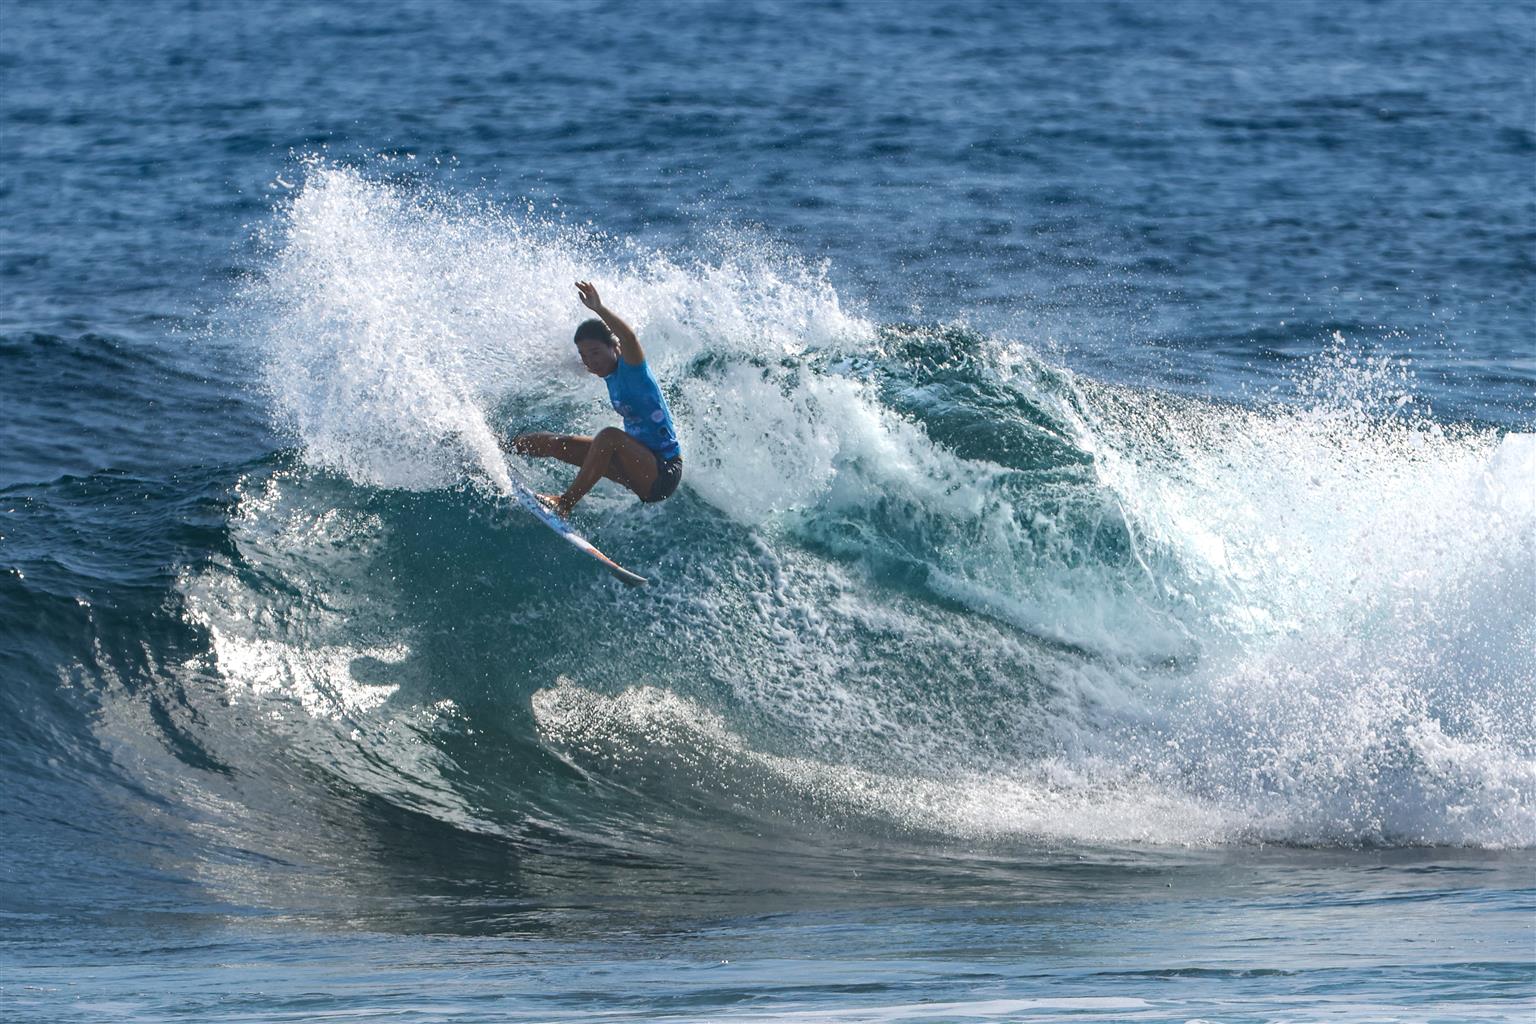 Philippine Surfing Federation: Cloud 9 local surfer wins 20th